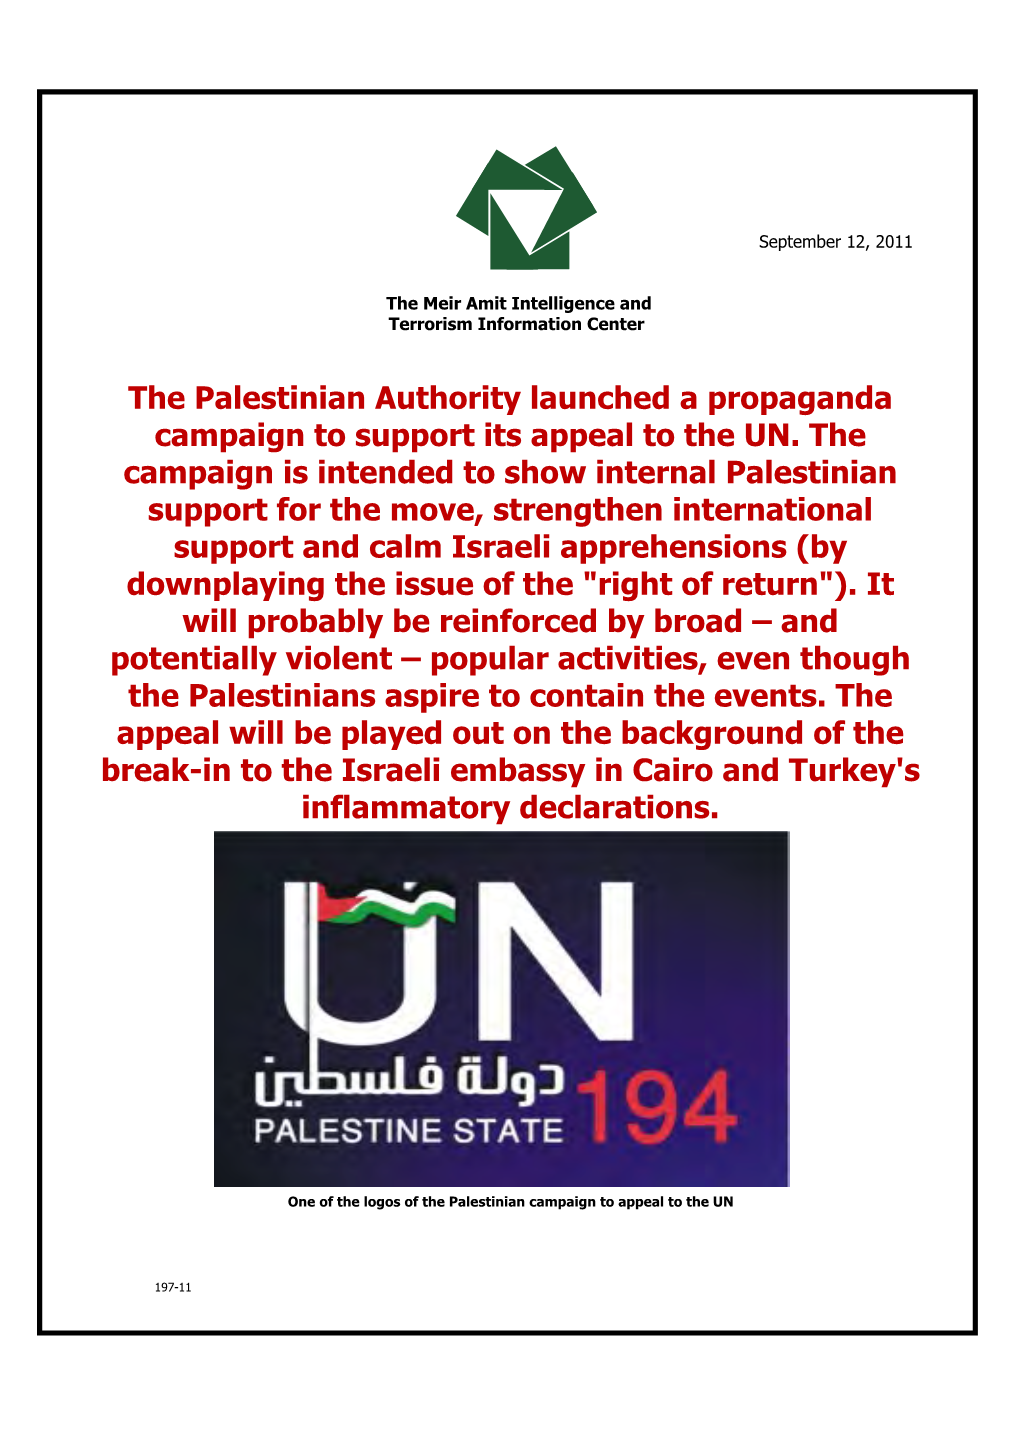 The Palestinian Authority Launched a Propaganda Campaign to Support Its Appeal to the UN